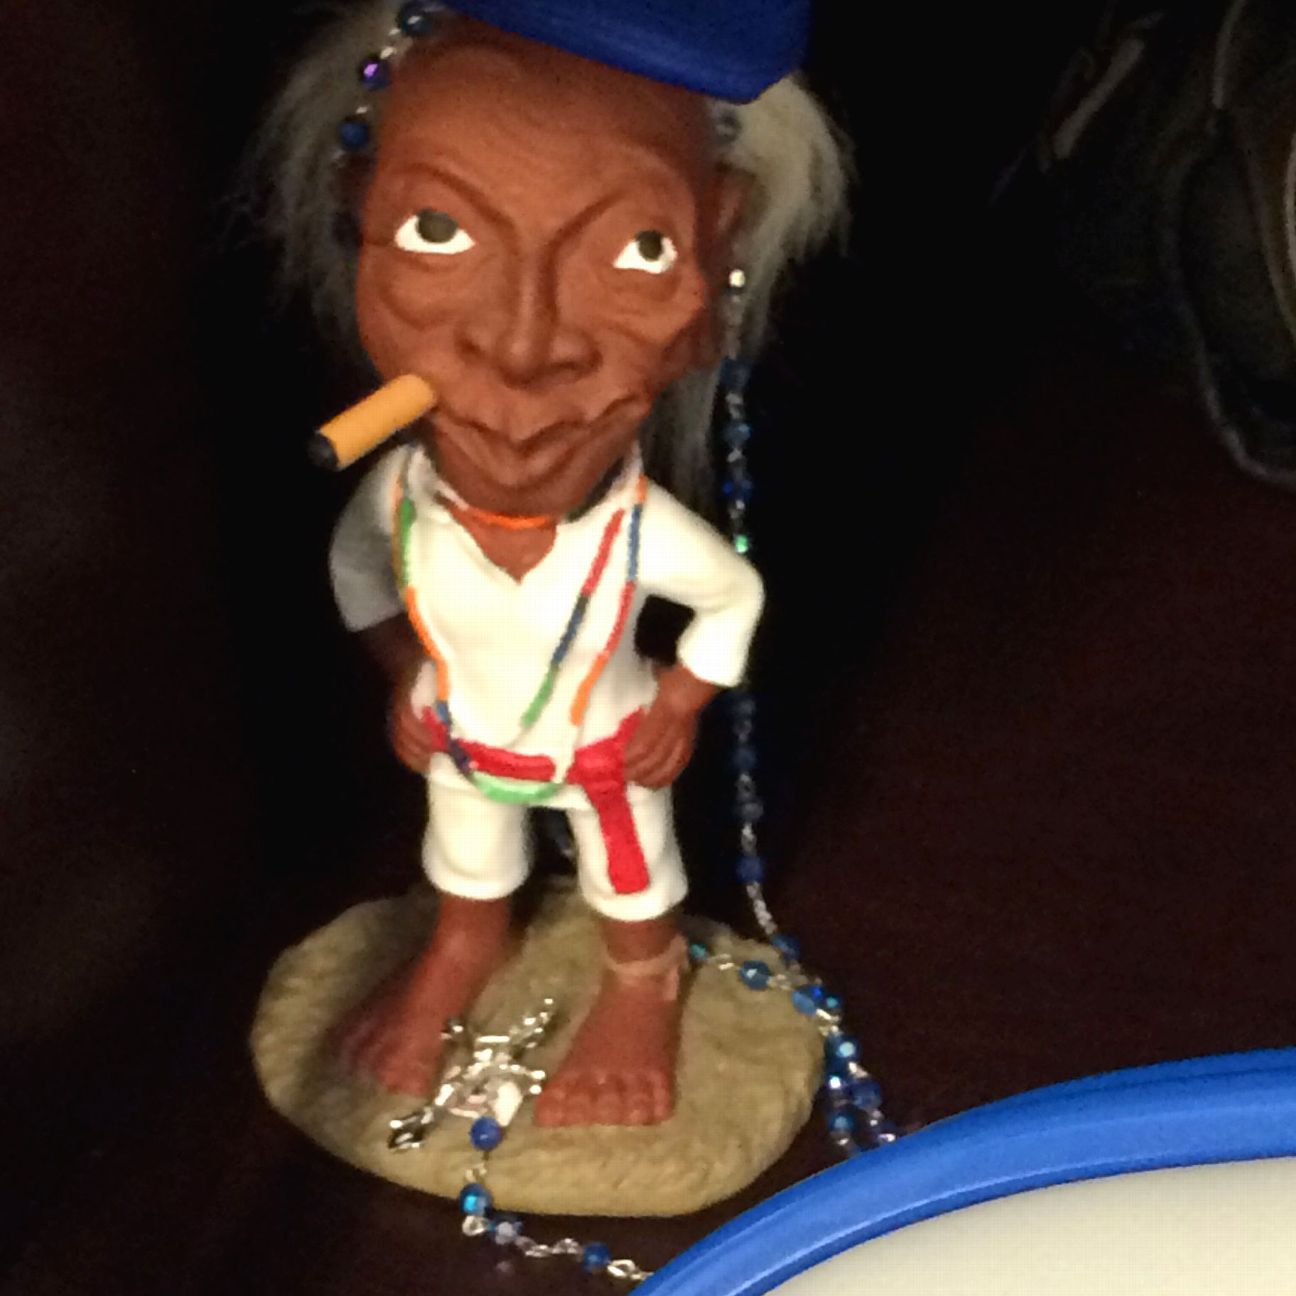 Major League Voodoo Doll Jobu Gets Shrine in Cleveland Clubhouse